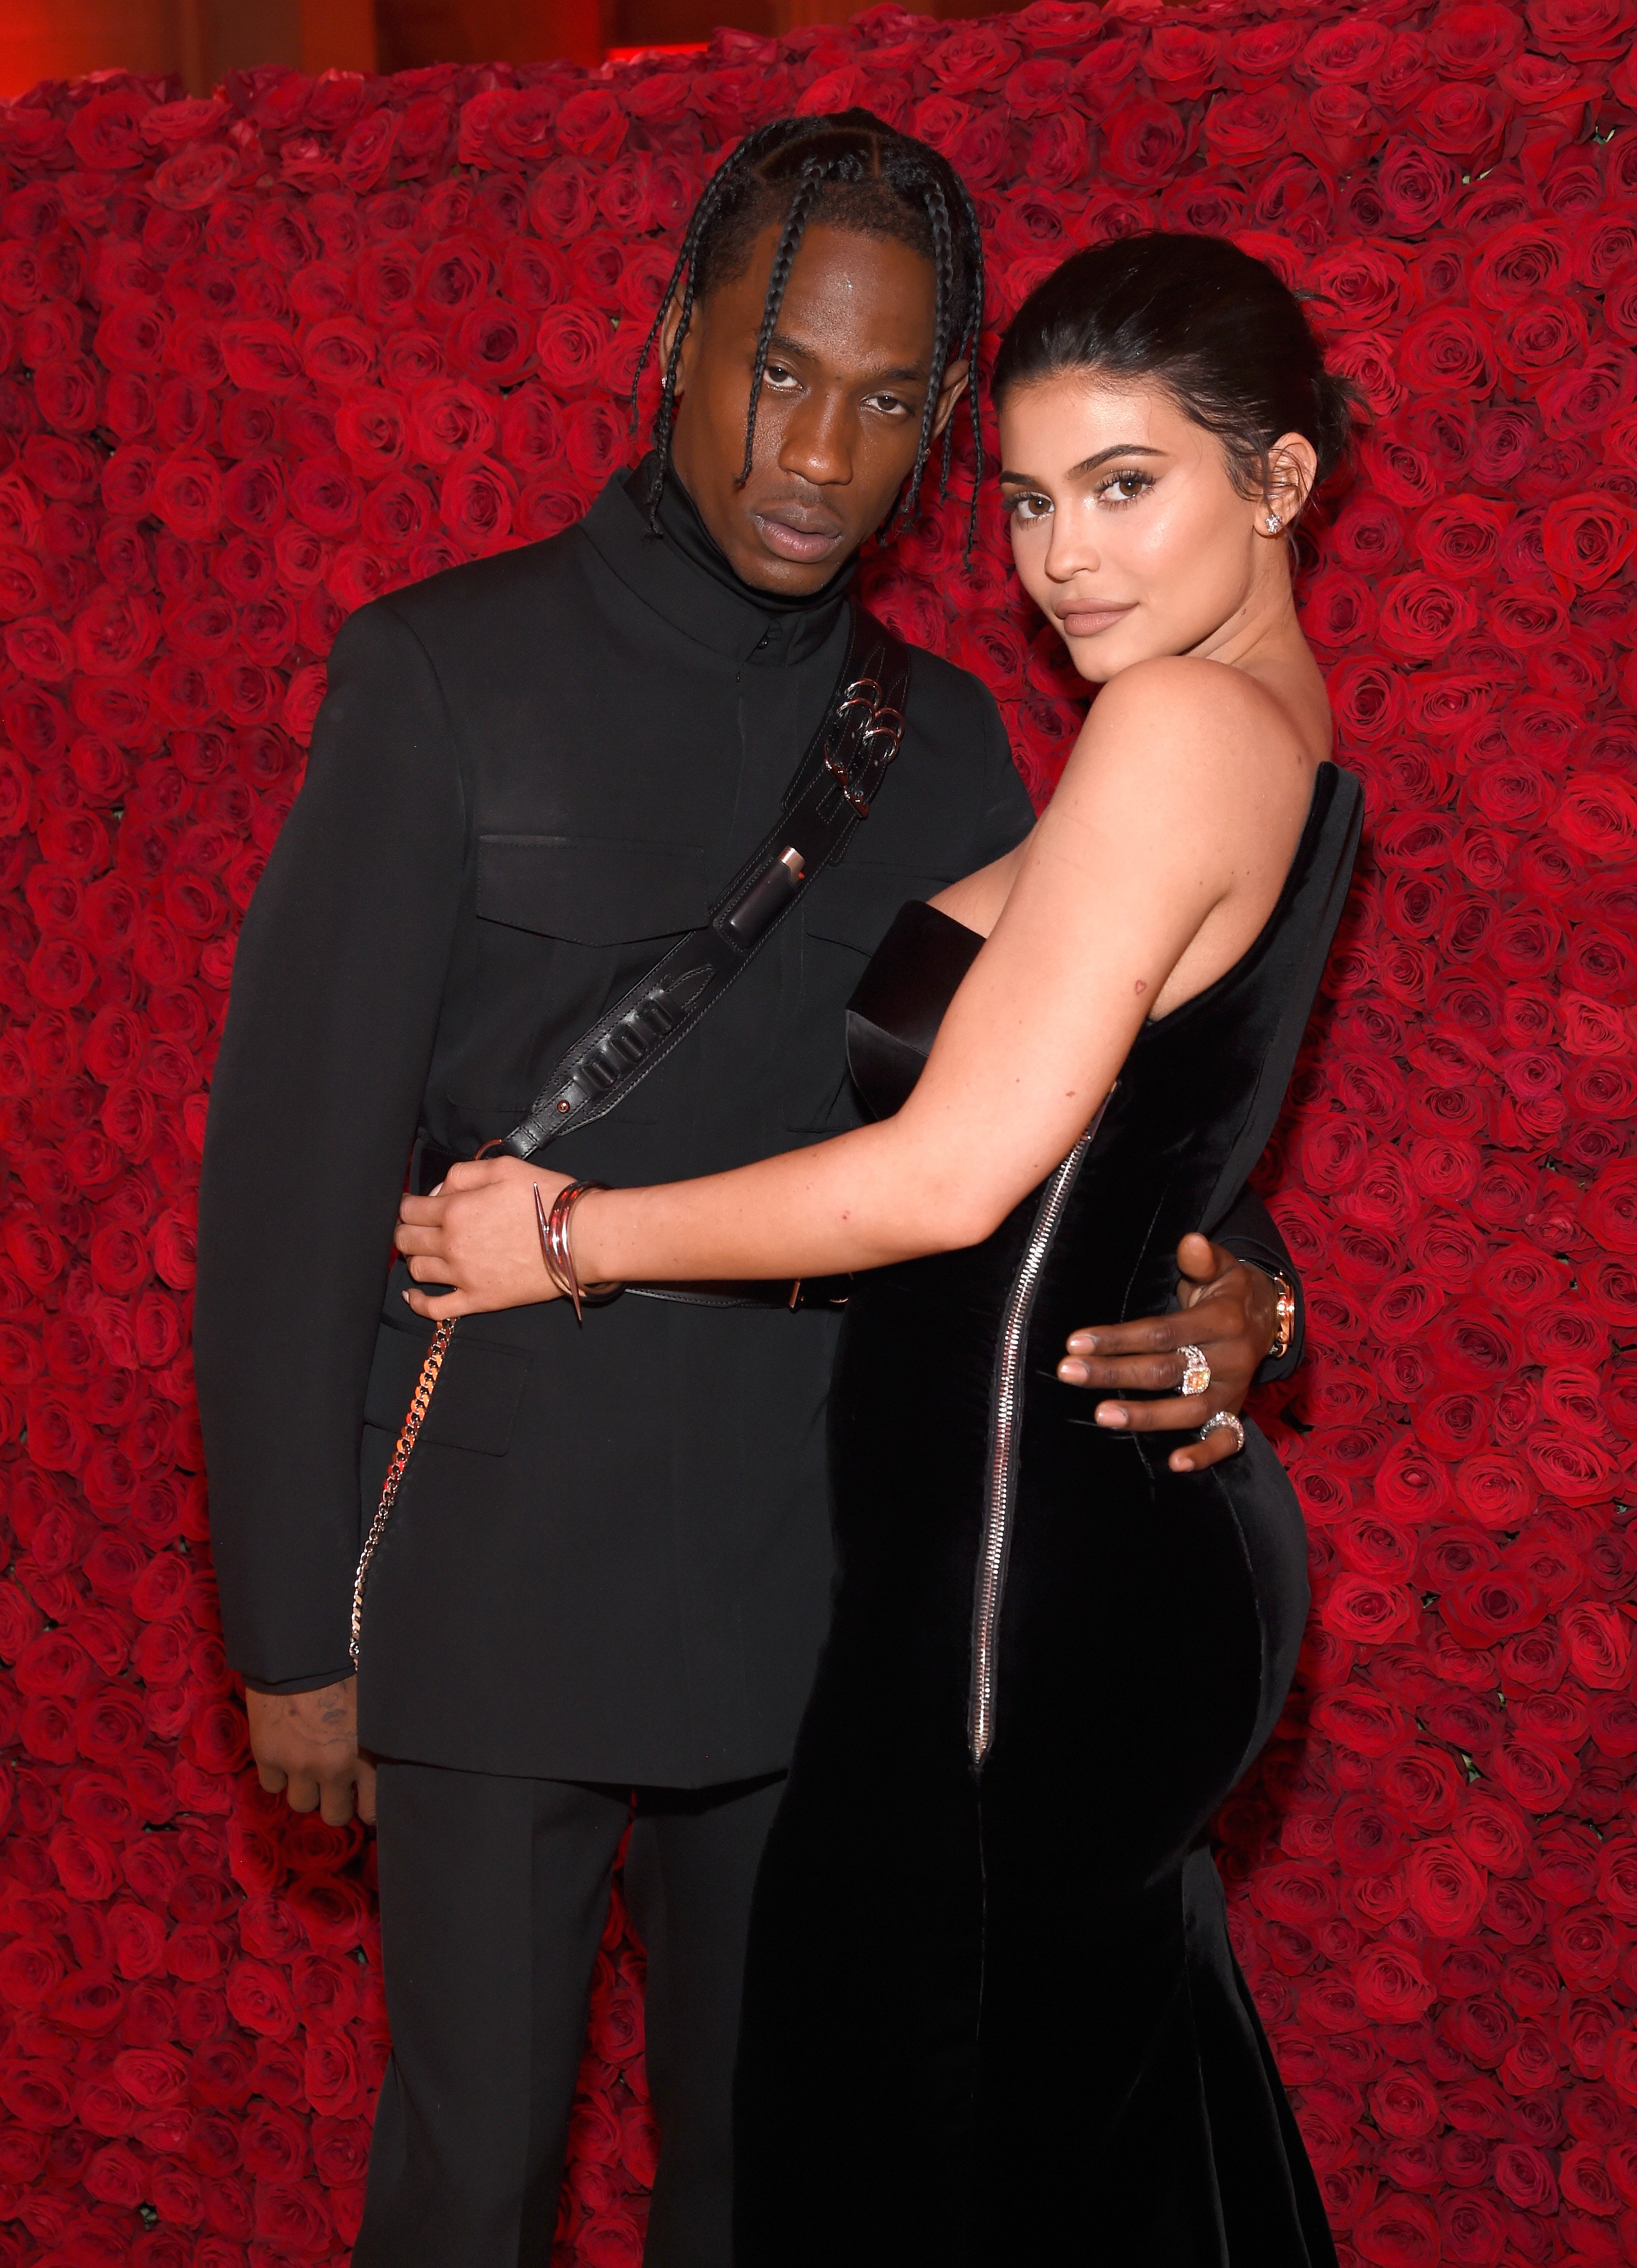 ravis Scott and Kylie Jenner attend the Heavenly Bodies: Fashion & The Catholic Imagination Costume Institute Gala at The Metropolitan Museum of Art on May 7, 2018. | Source: Getty Images